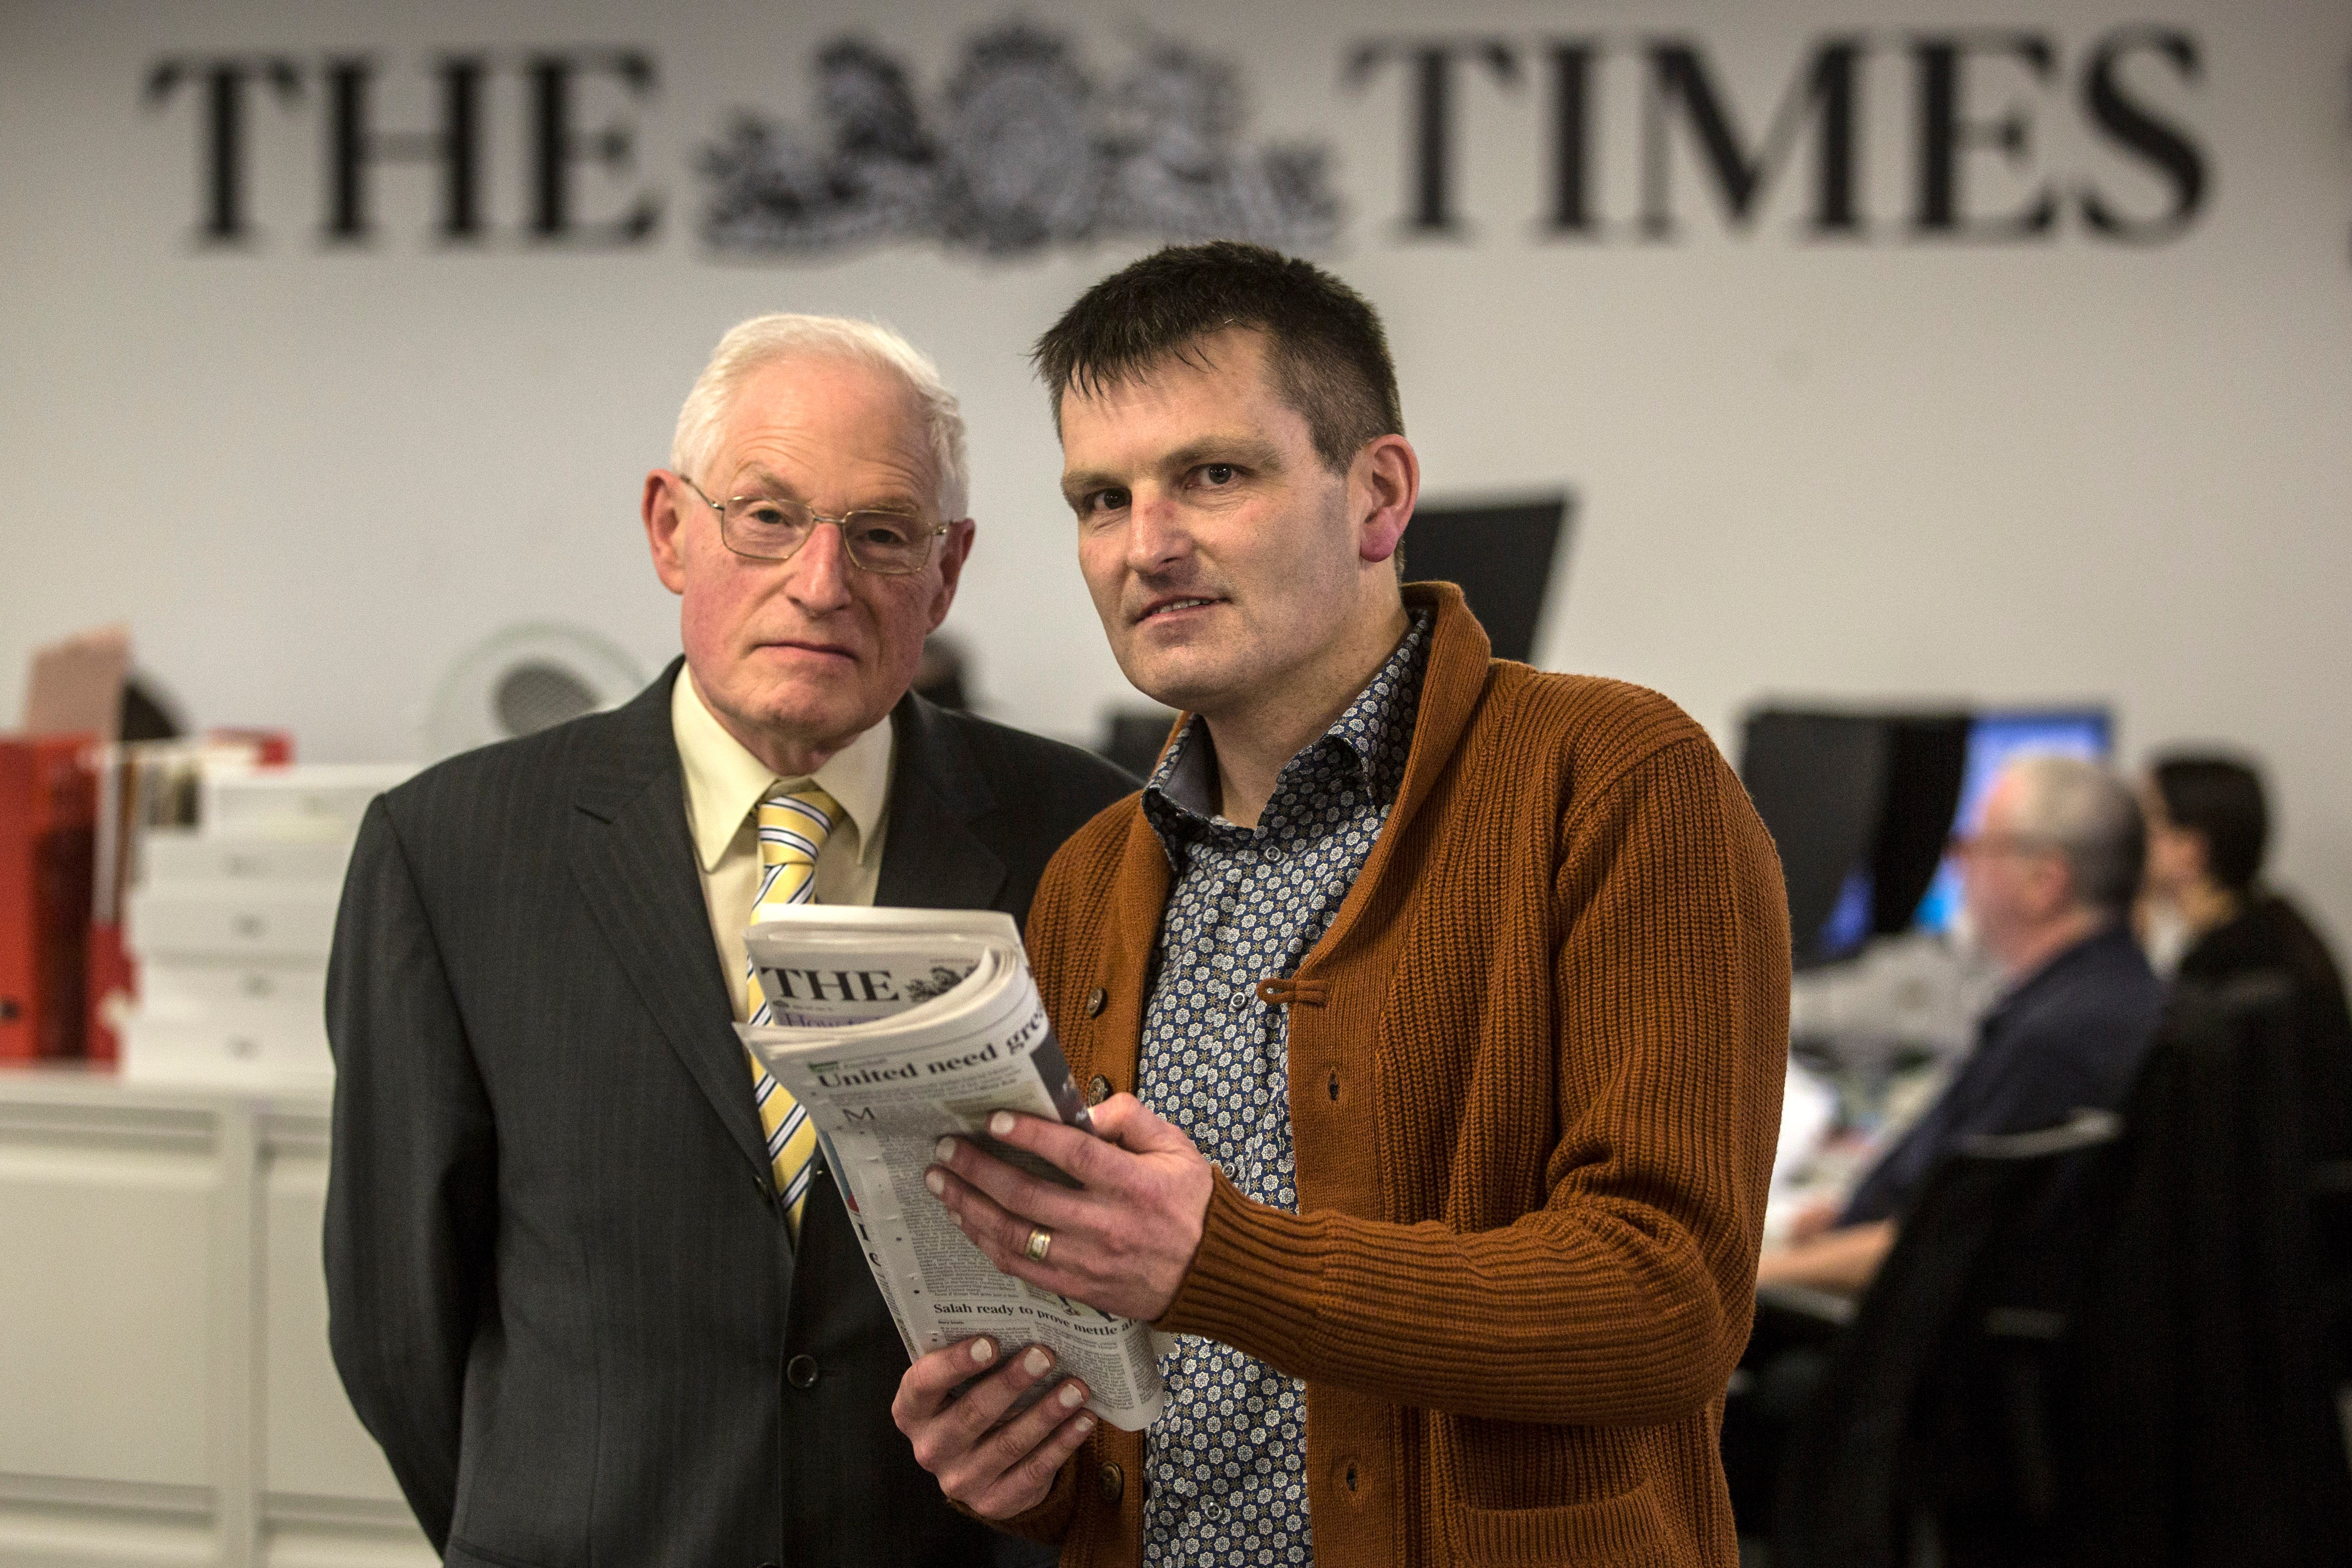 Rogan, right, in the offices of The Times, took over from Richard Browne as crossword editor in 2014. They devised clues about each other